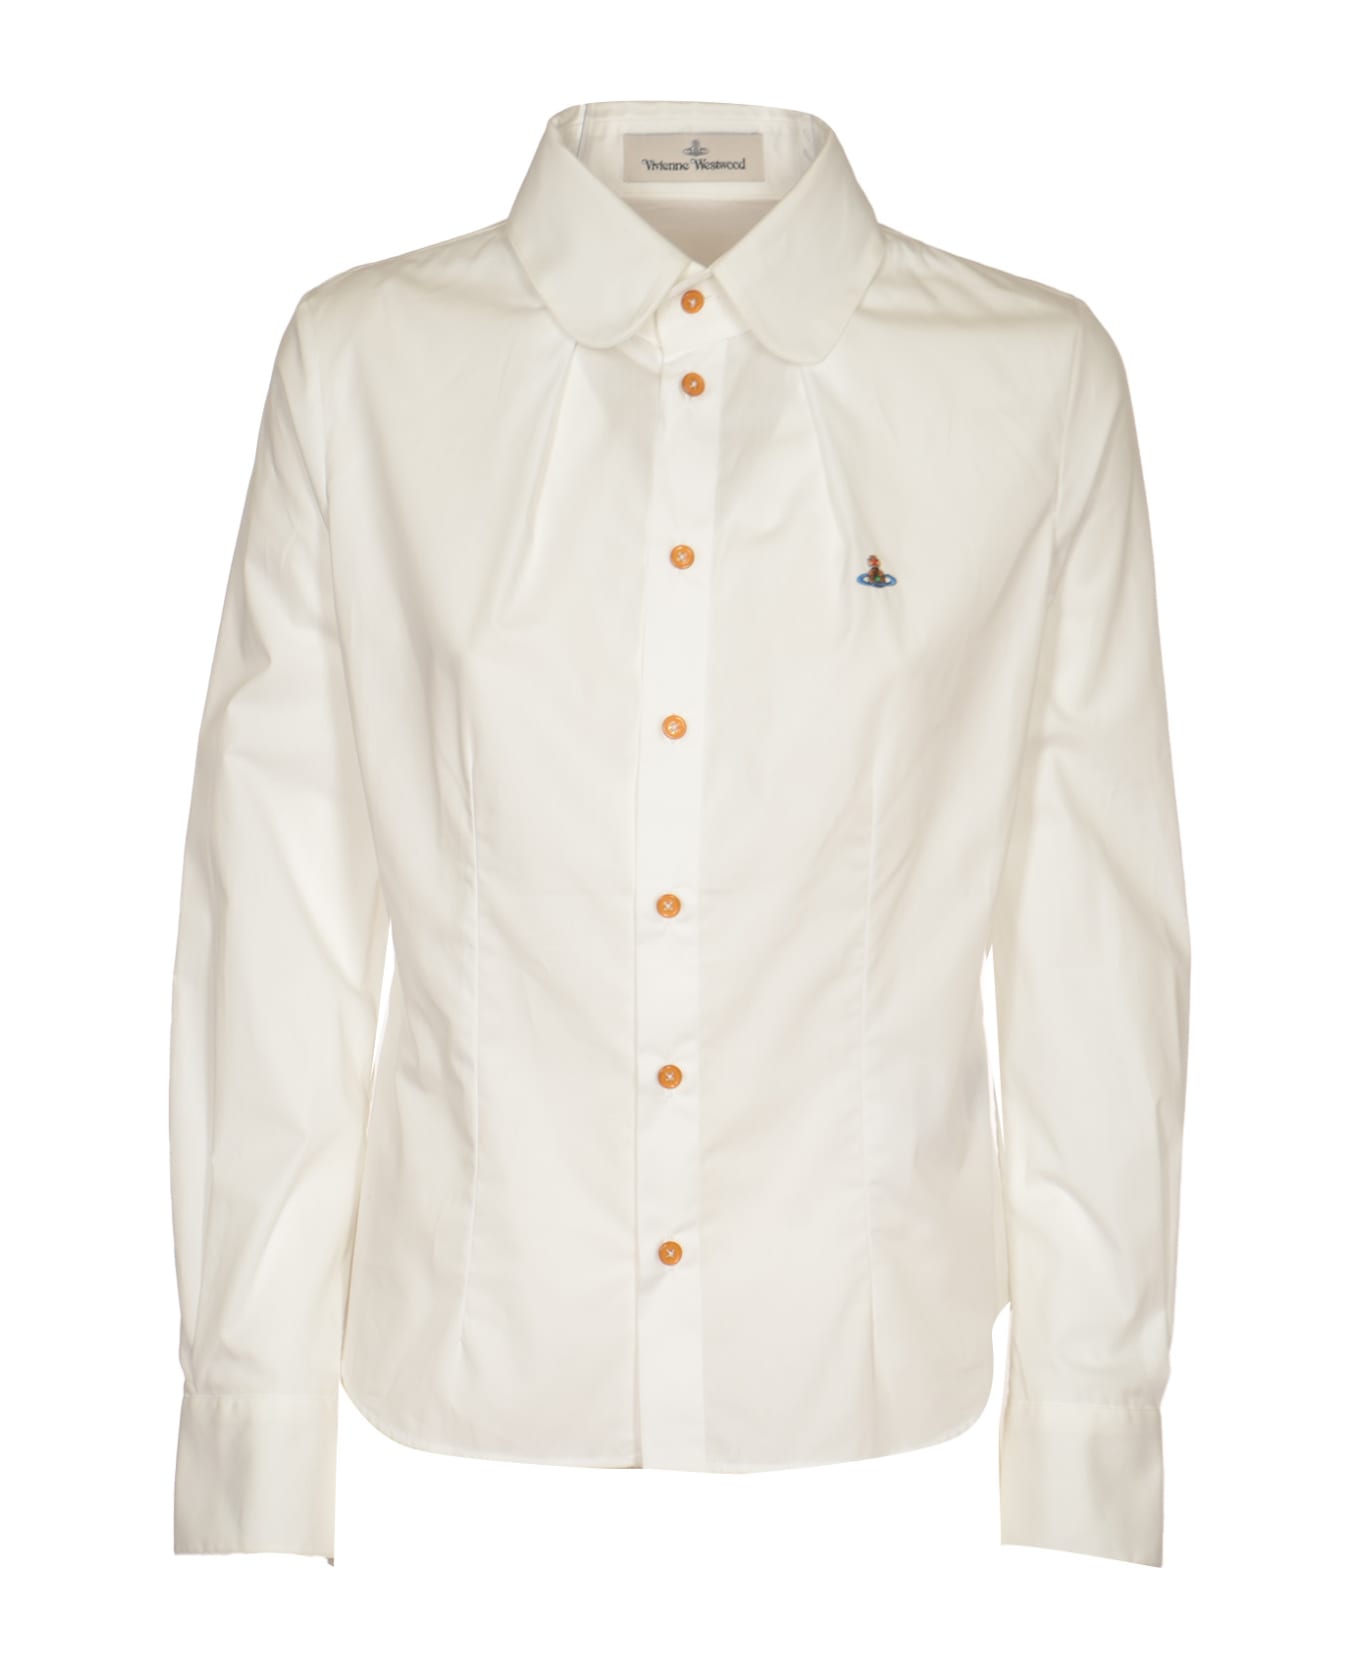 Vivienne Westwood Toulouse Shirt - White シャツ